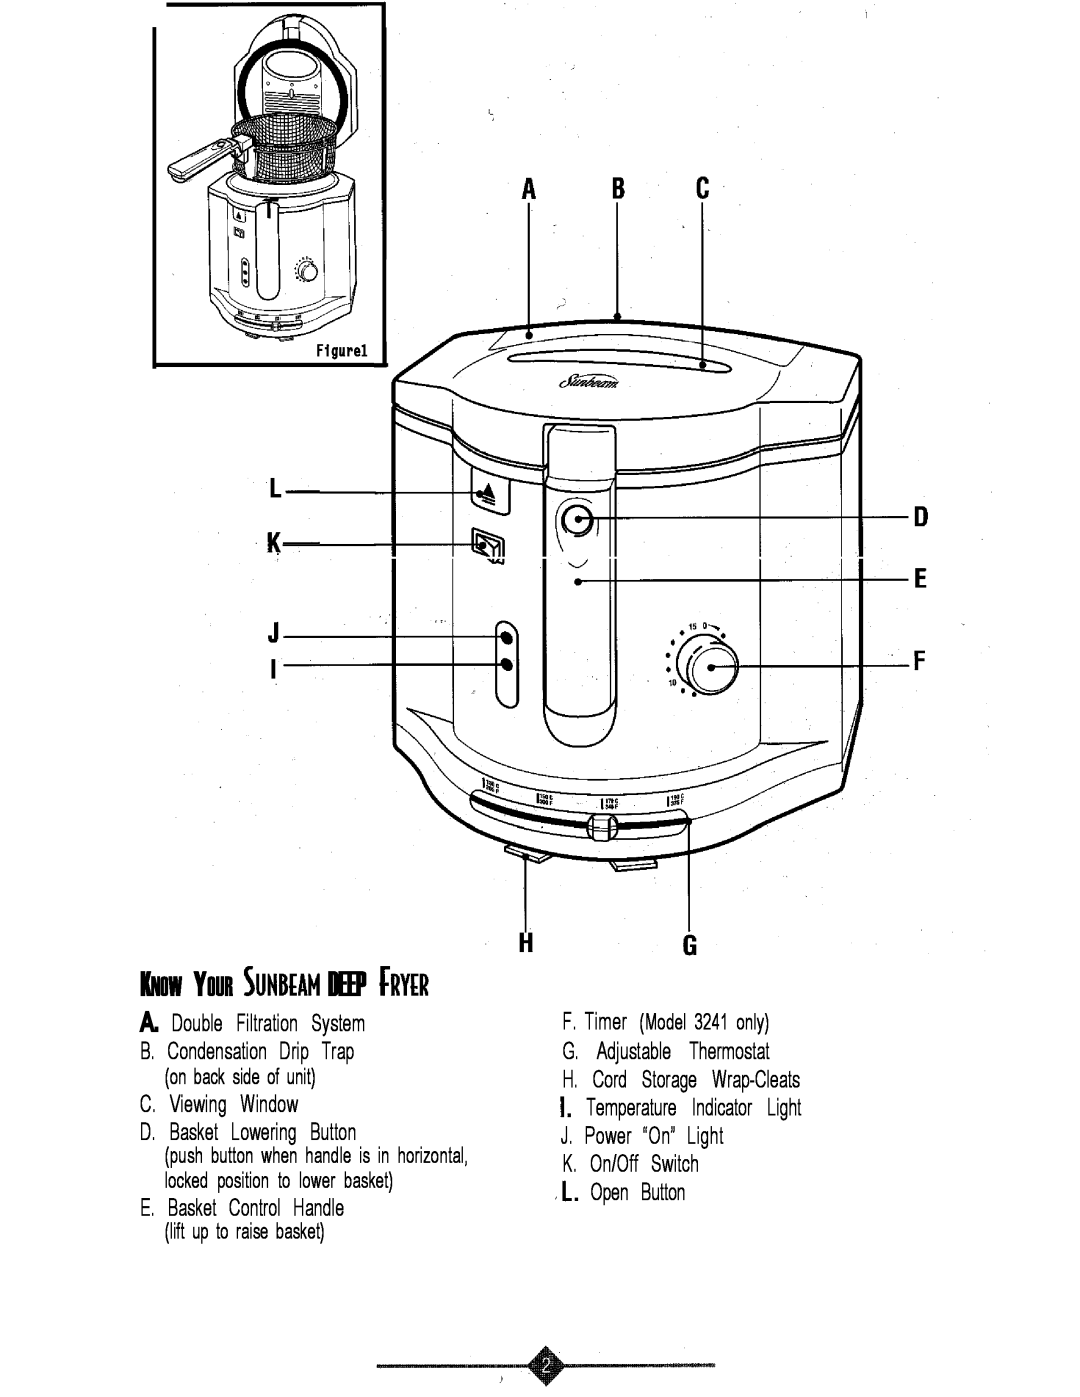 Sunbeam 3241 Know Your Deep, A. Double Filtration System, B. Condensation Drip Trap, E. Basket Control Handle, Adjustable 